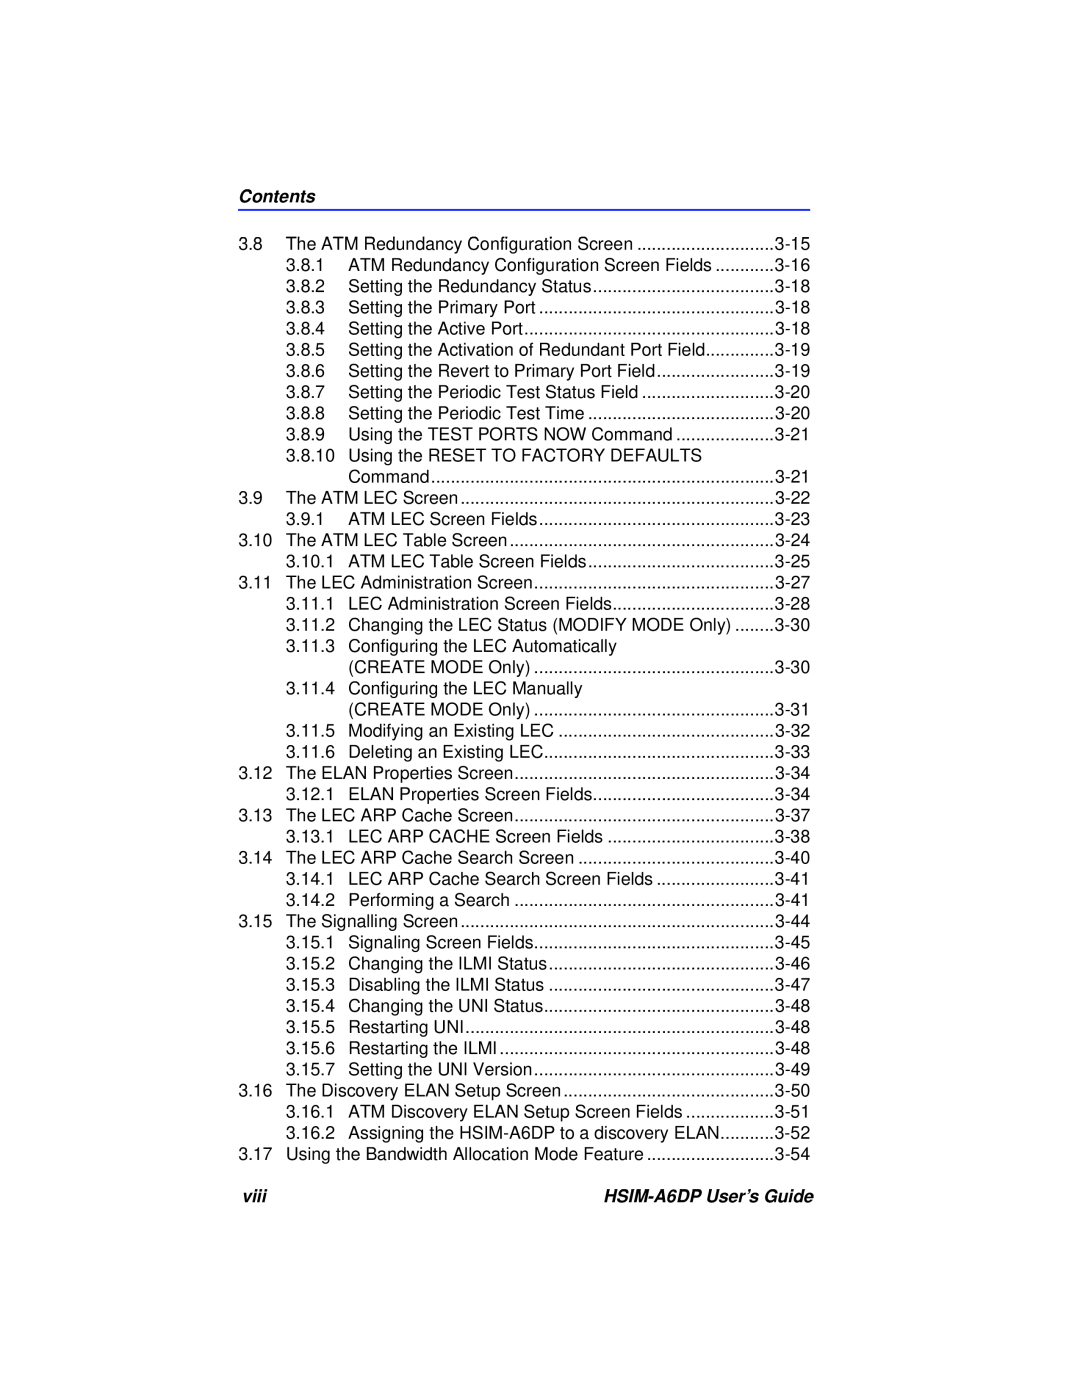 Cabletron Systems manual Contents, viii, HSIM-A6DP User’s Guide 